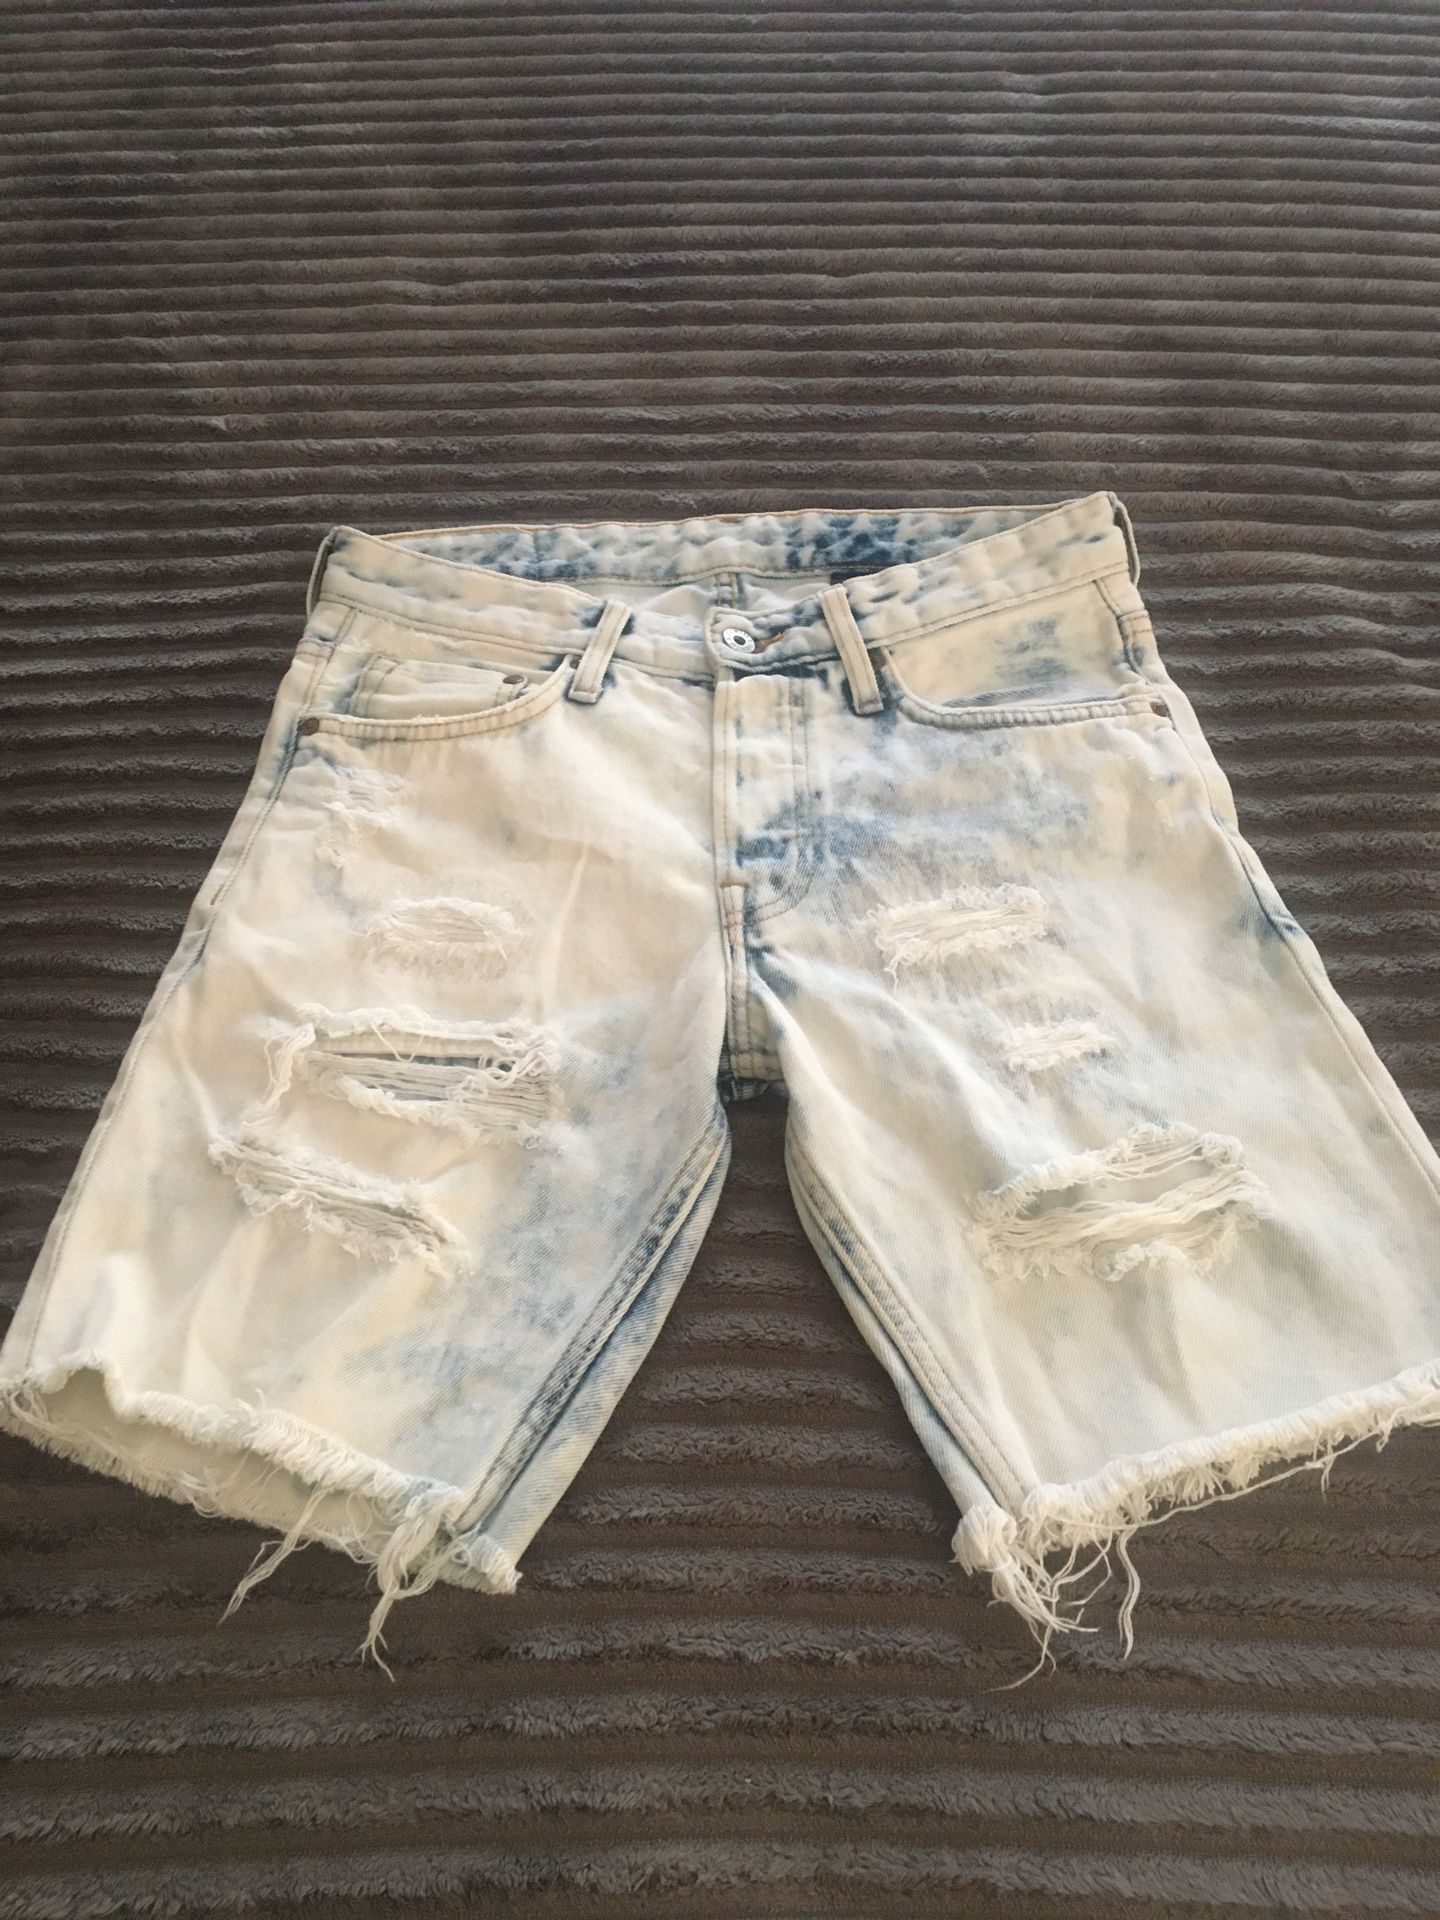 Shorts pants Clothing line H&M and Abercrombie & Fitch